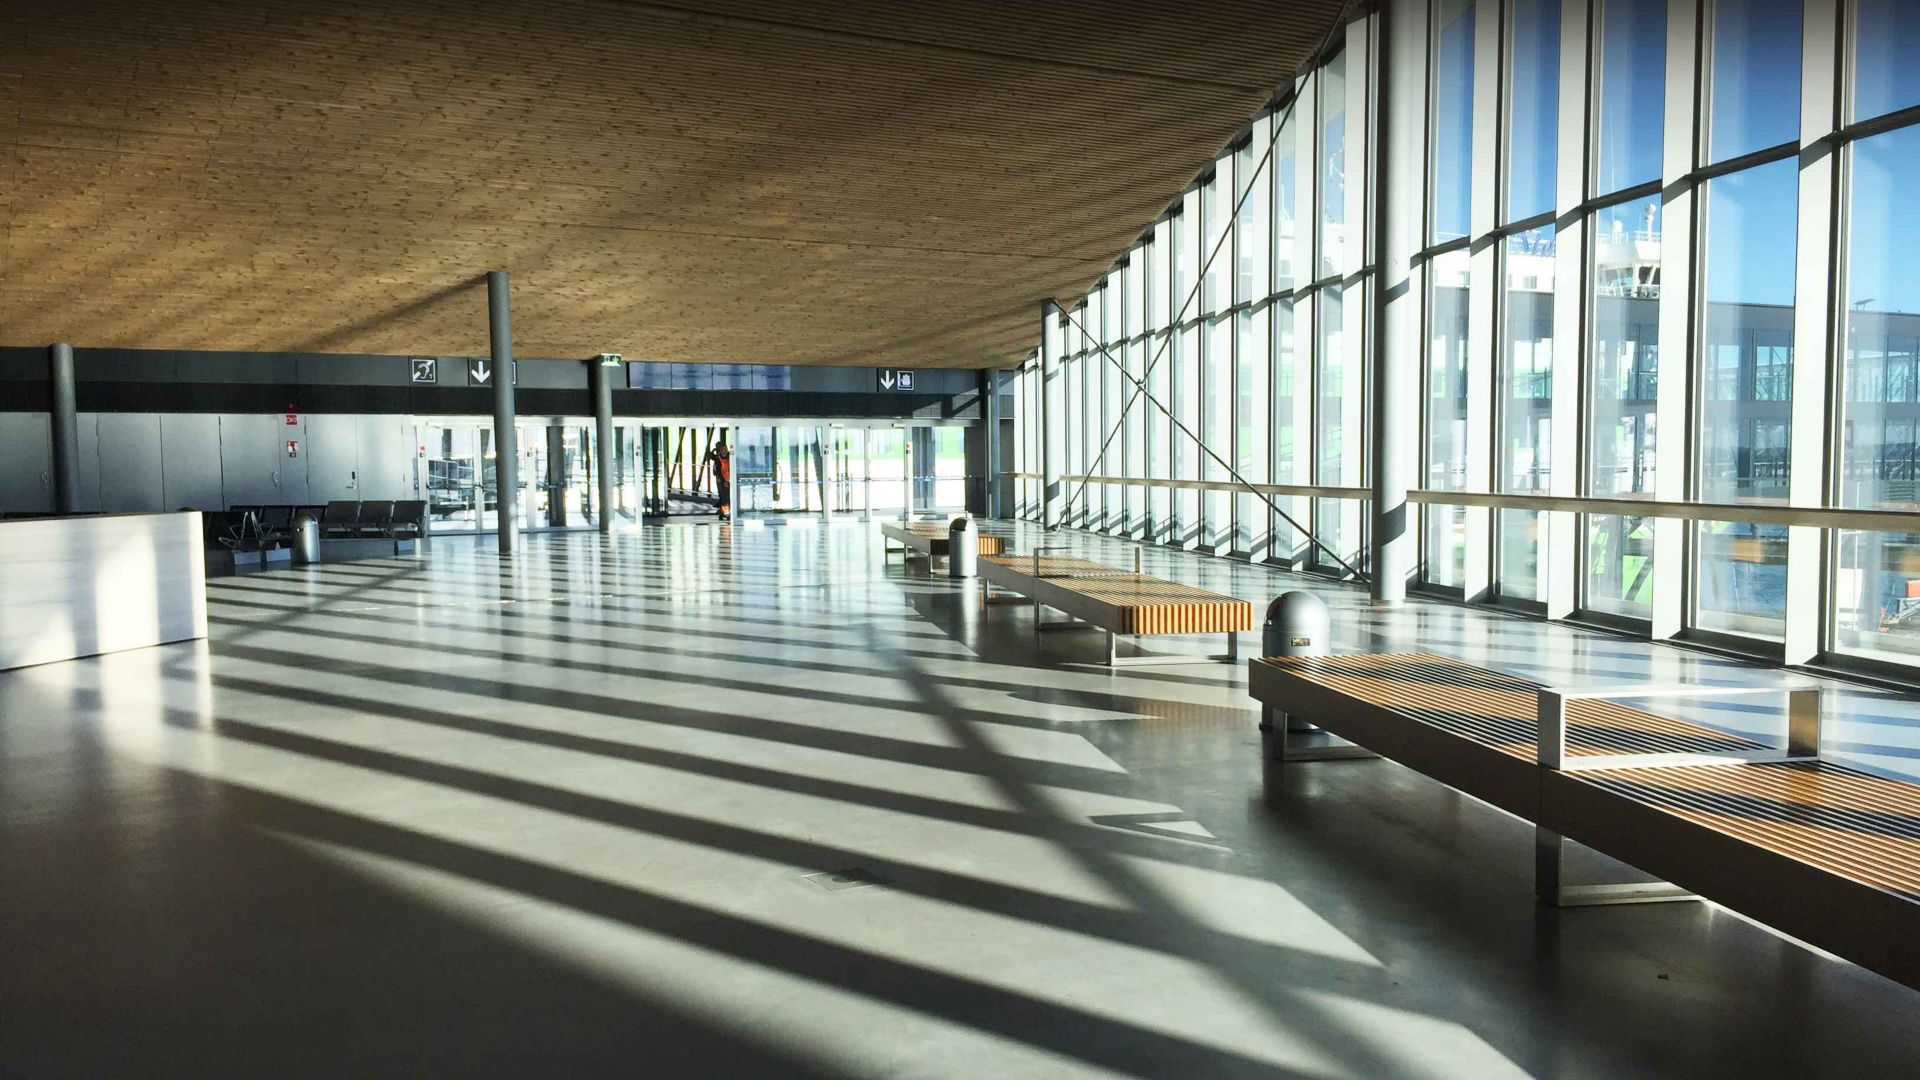 Polished grey concrete floor in airport with shadows and glass windows